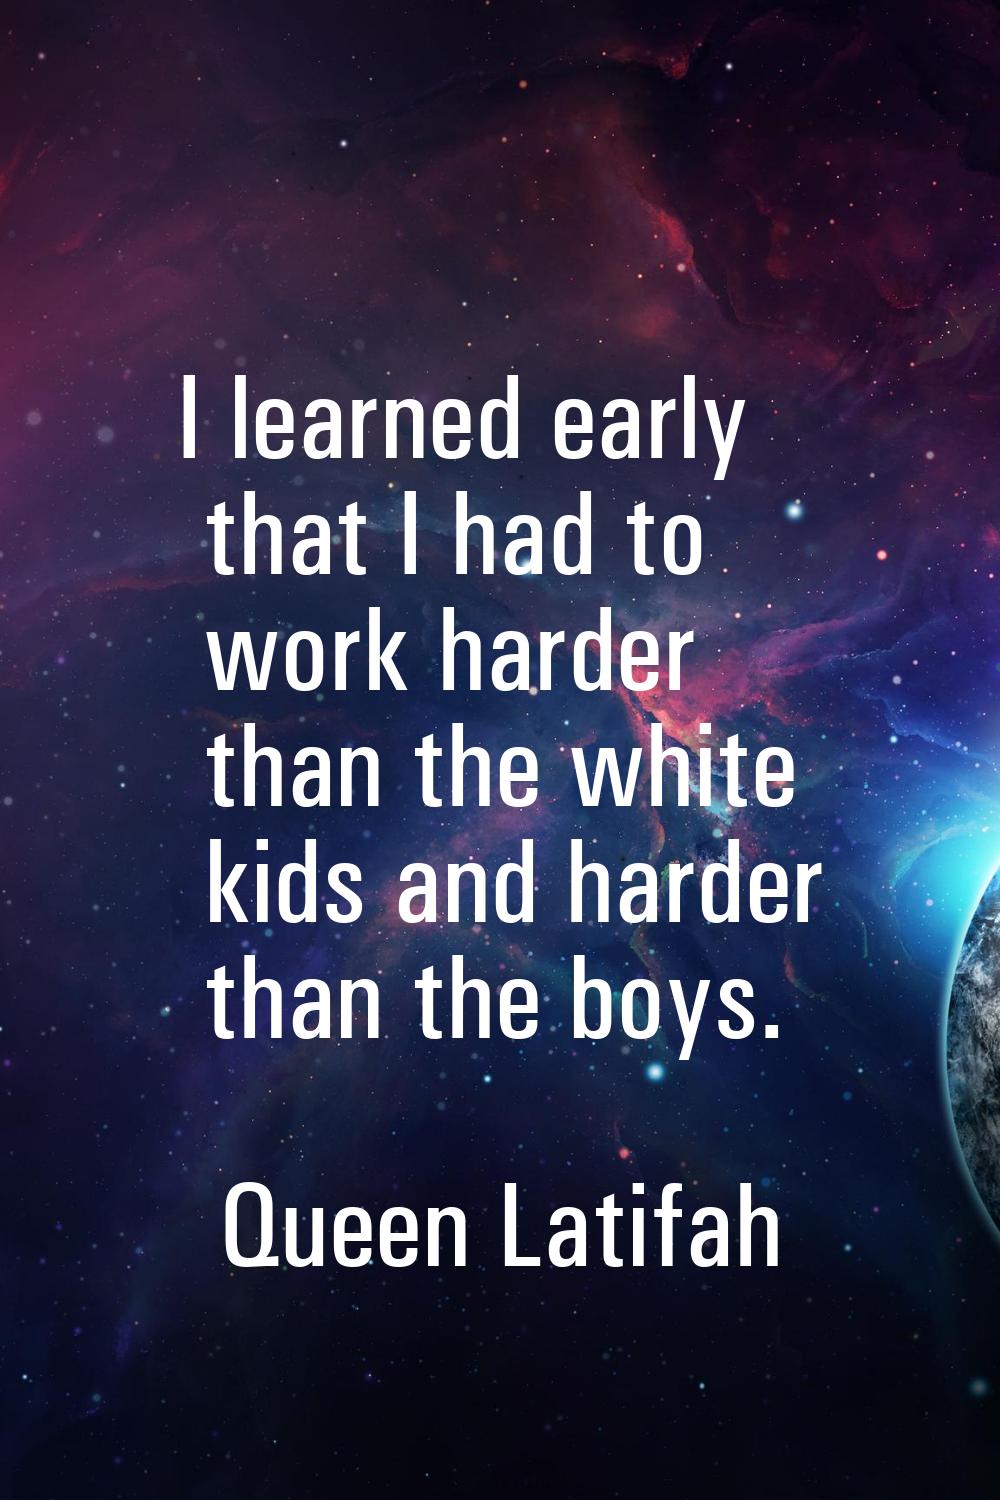 I learned early that I had to work harder than the white kids and harder than the boys.